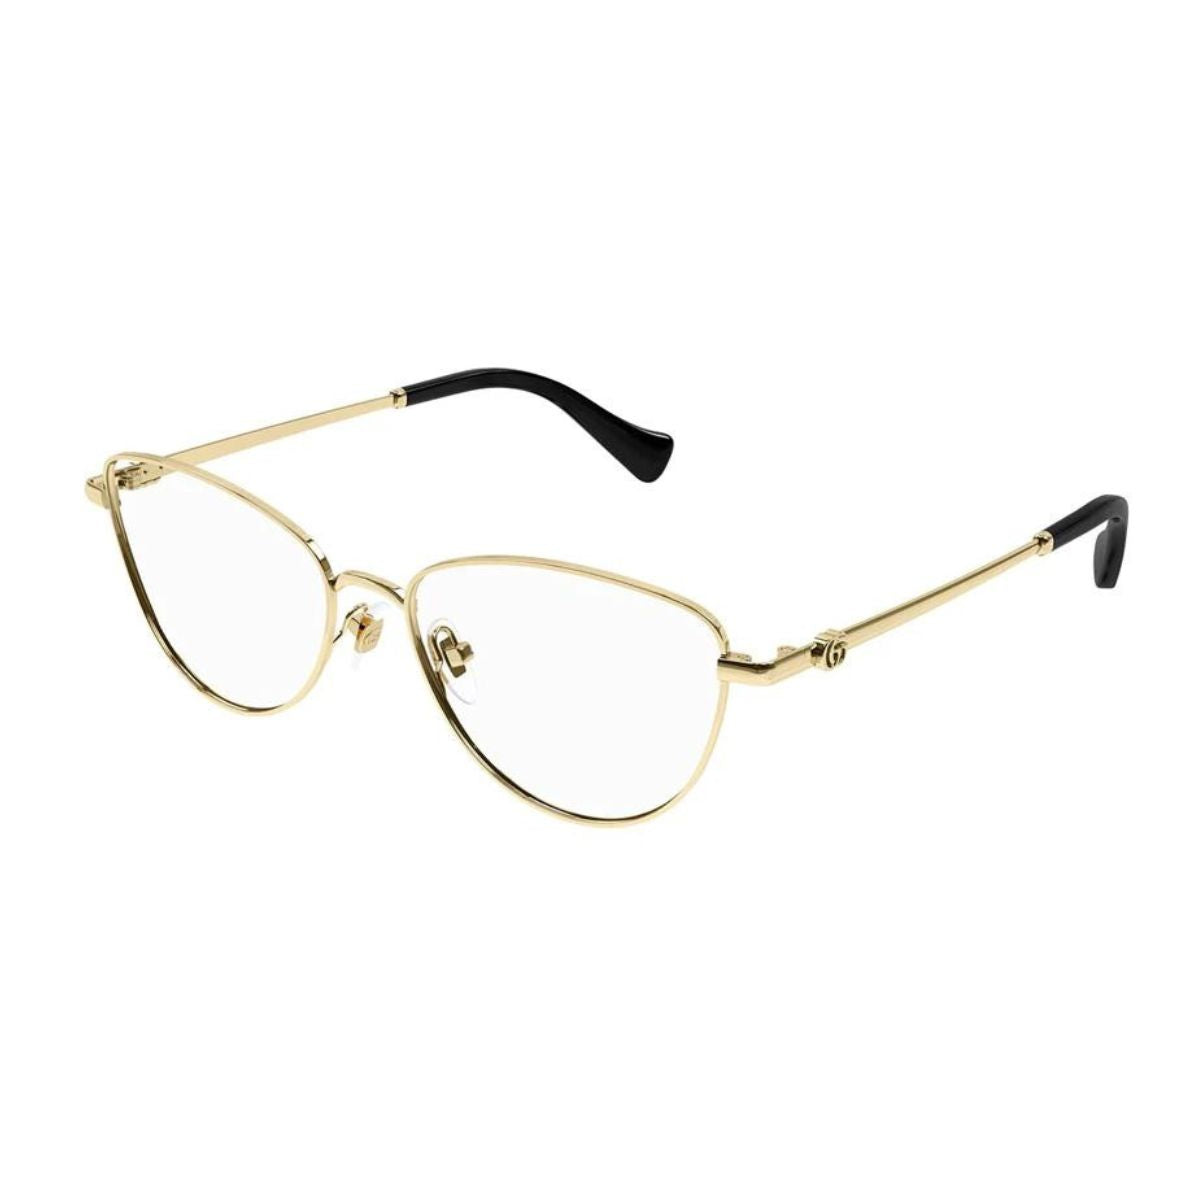 "Gucci GG1595O 001 spectacle eyewear frame for women's online at optorium"